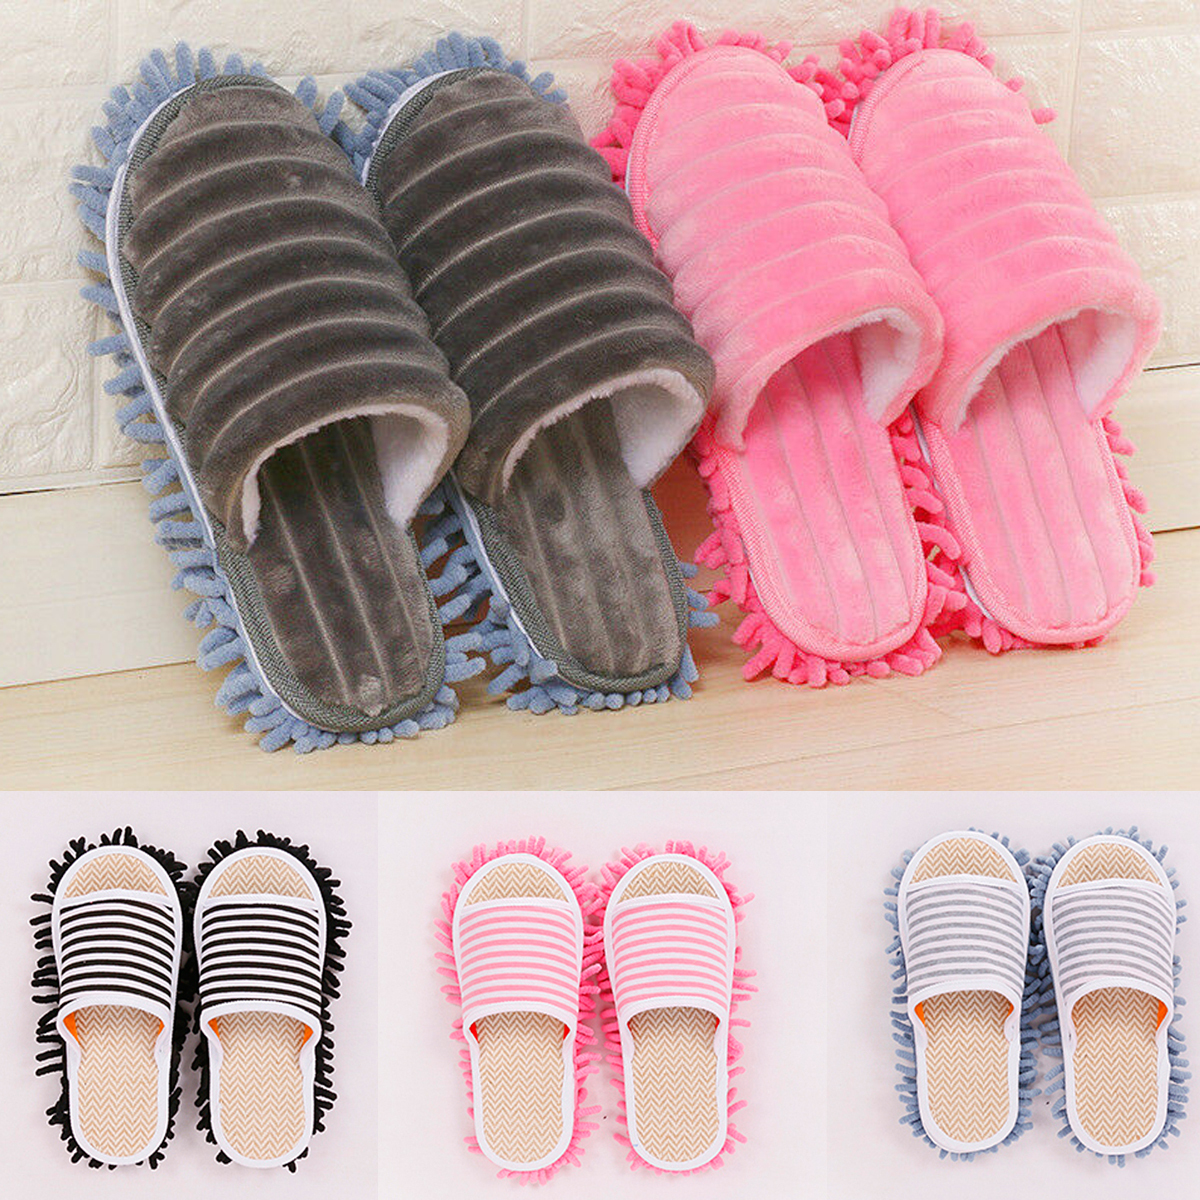 log squat Forsendelse Washable Microfiber Dust Mop Slippers Lazy Quick House Floor Cleaning Shoes  Home Shoes - AliExpress Home & Garden